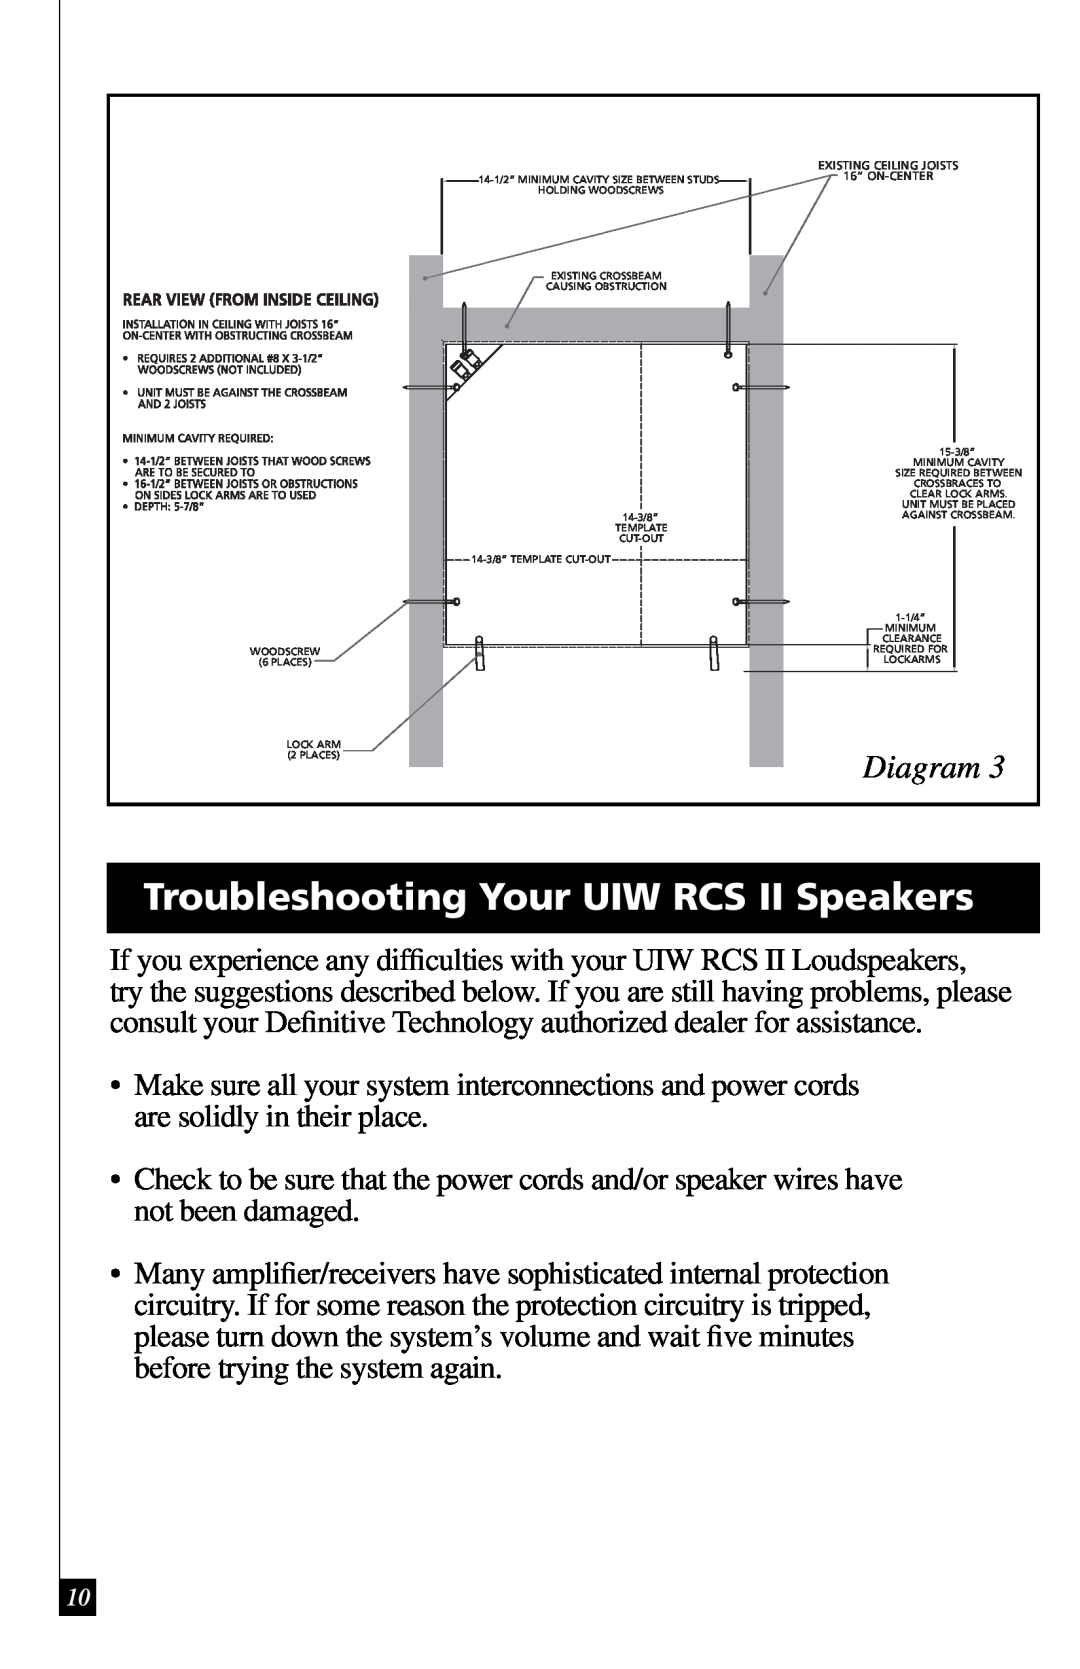 Definitive Technology owner manual Troubleshooting Your UIW RCS II Speakers, Diagram 